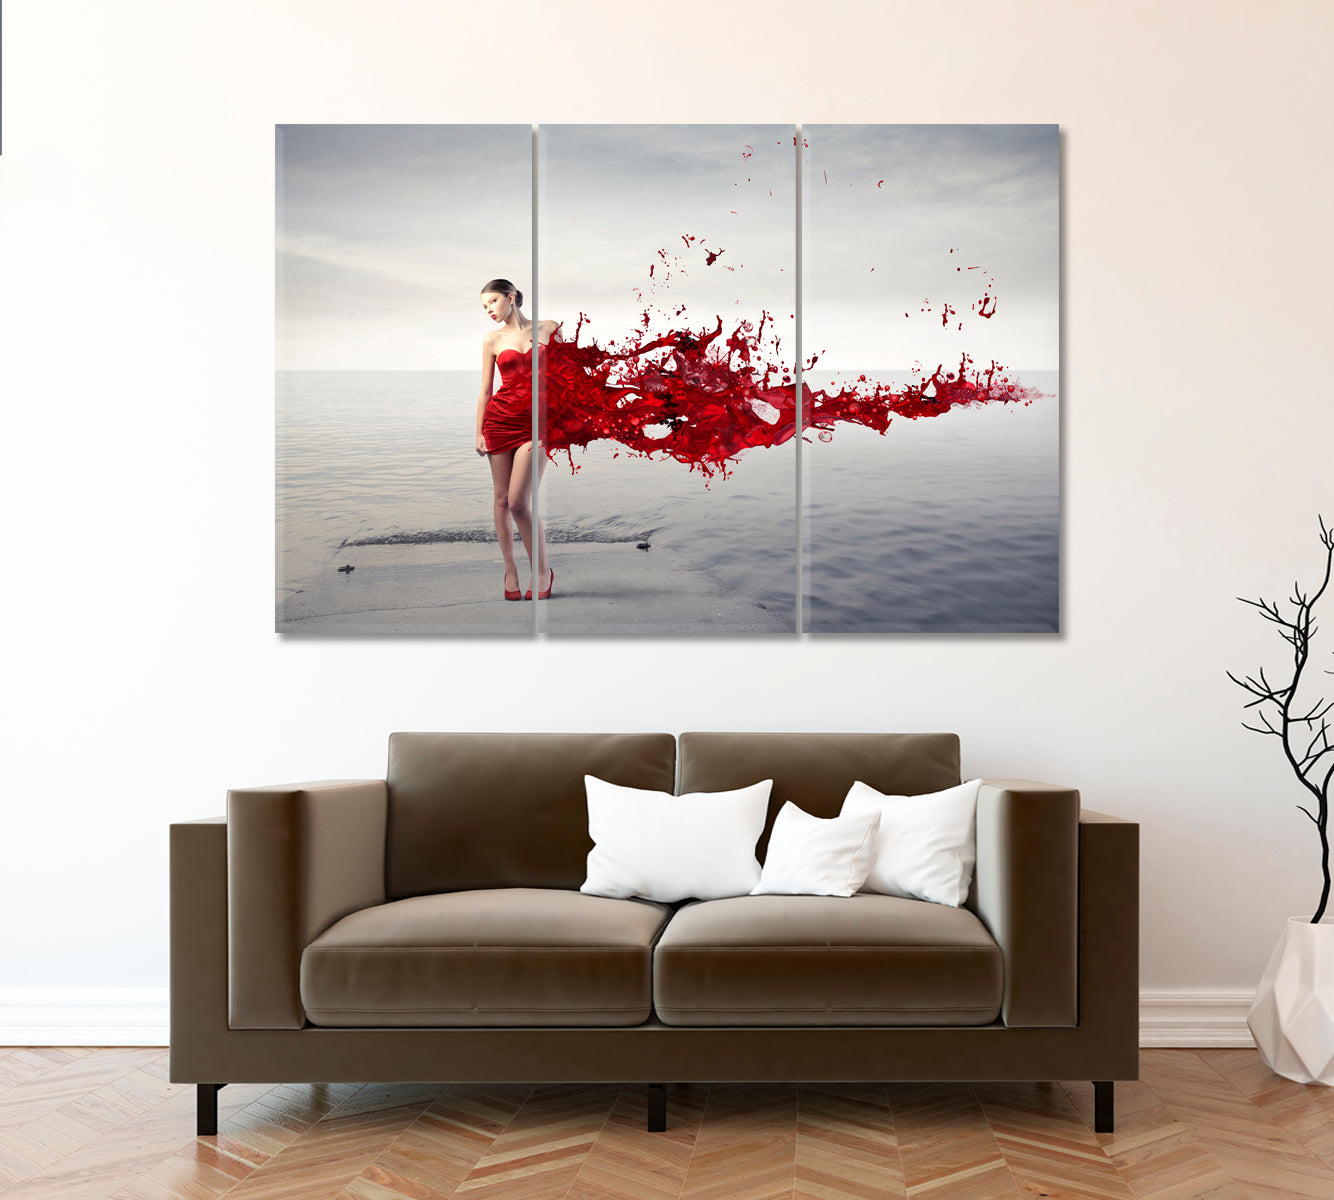 LADY IN RED Beautiful Woman on Pier Vintage Affordable Canvas Print Artesty 3 panels 36" x 24" 